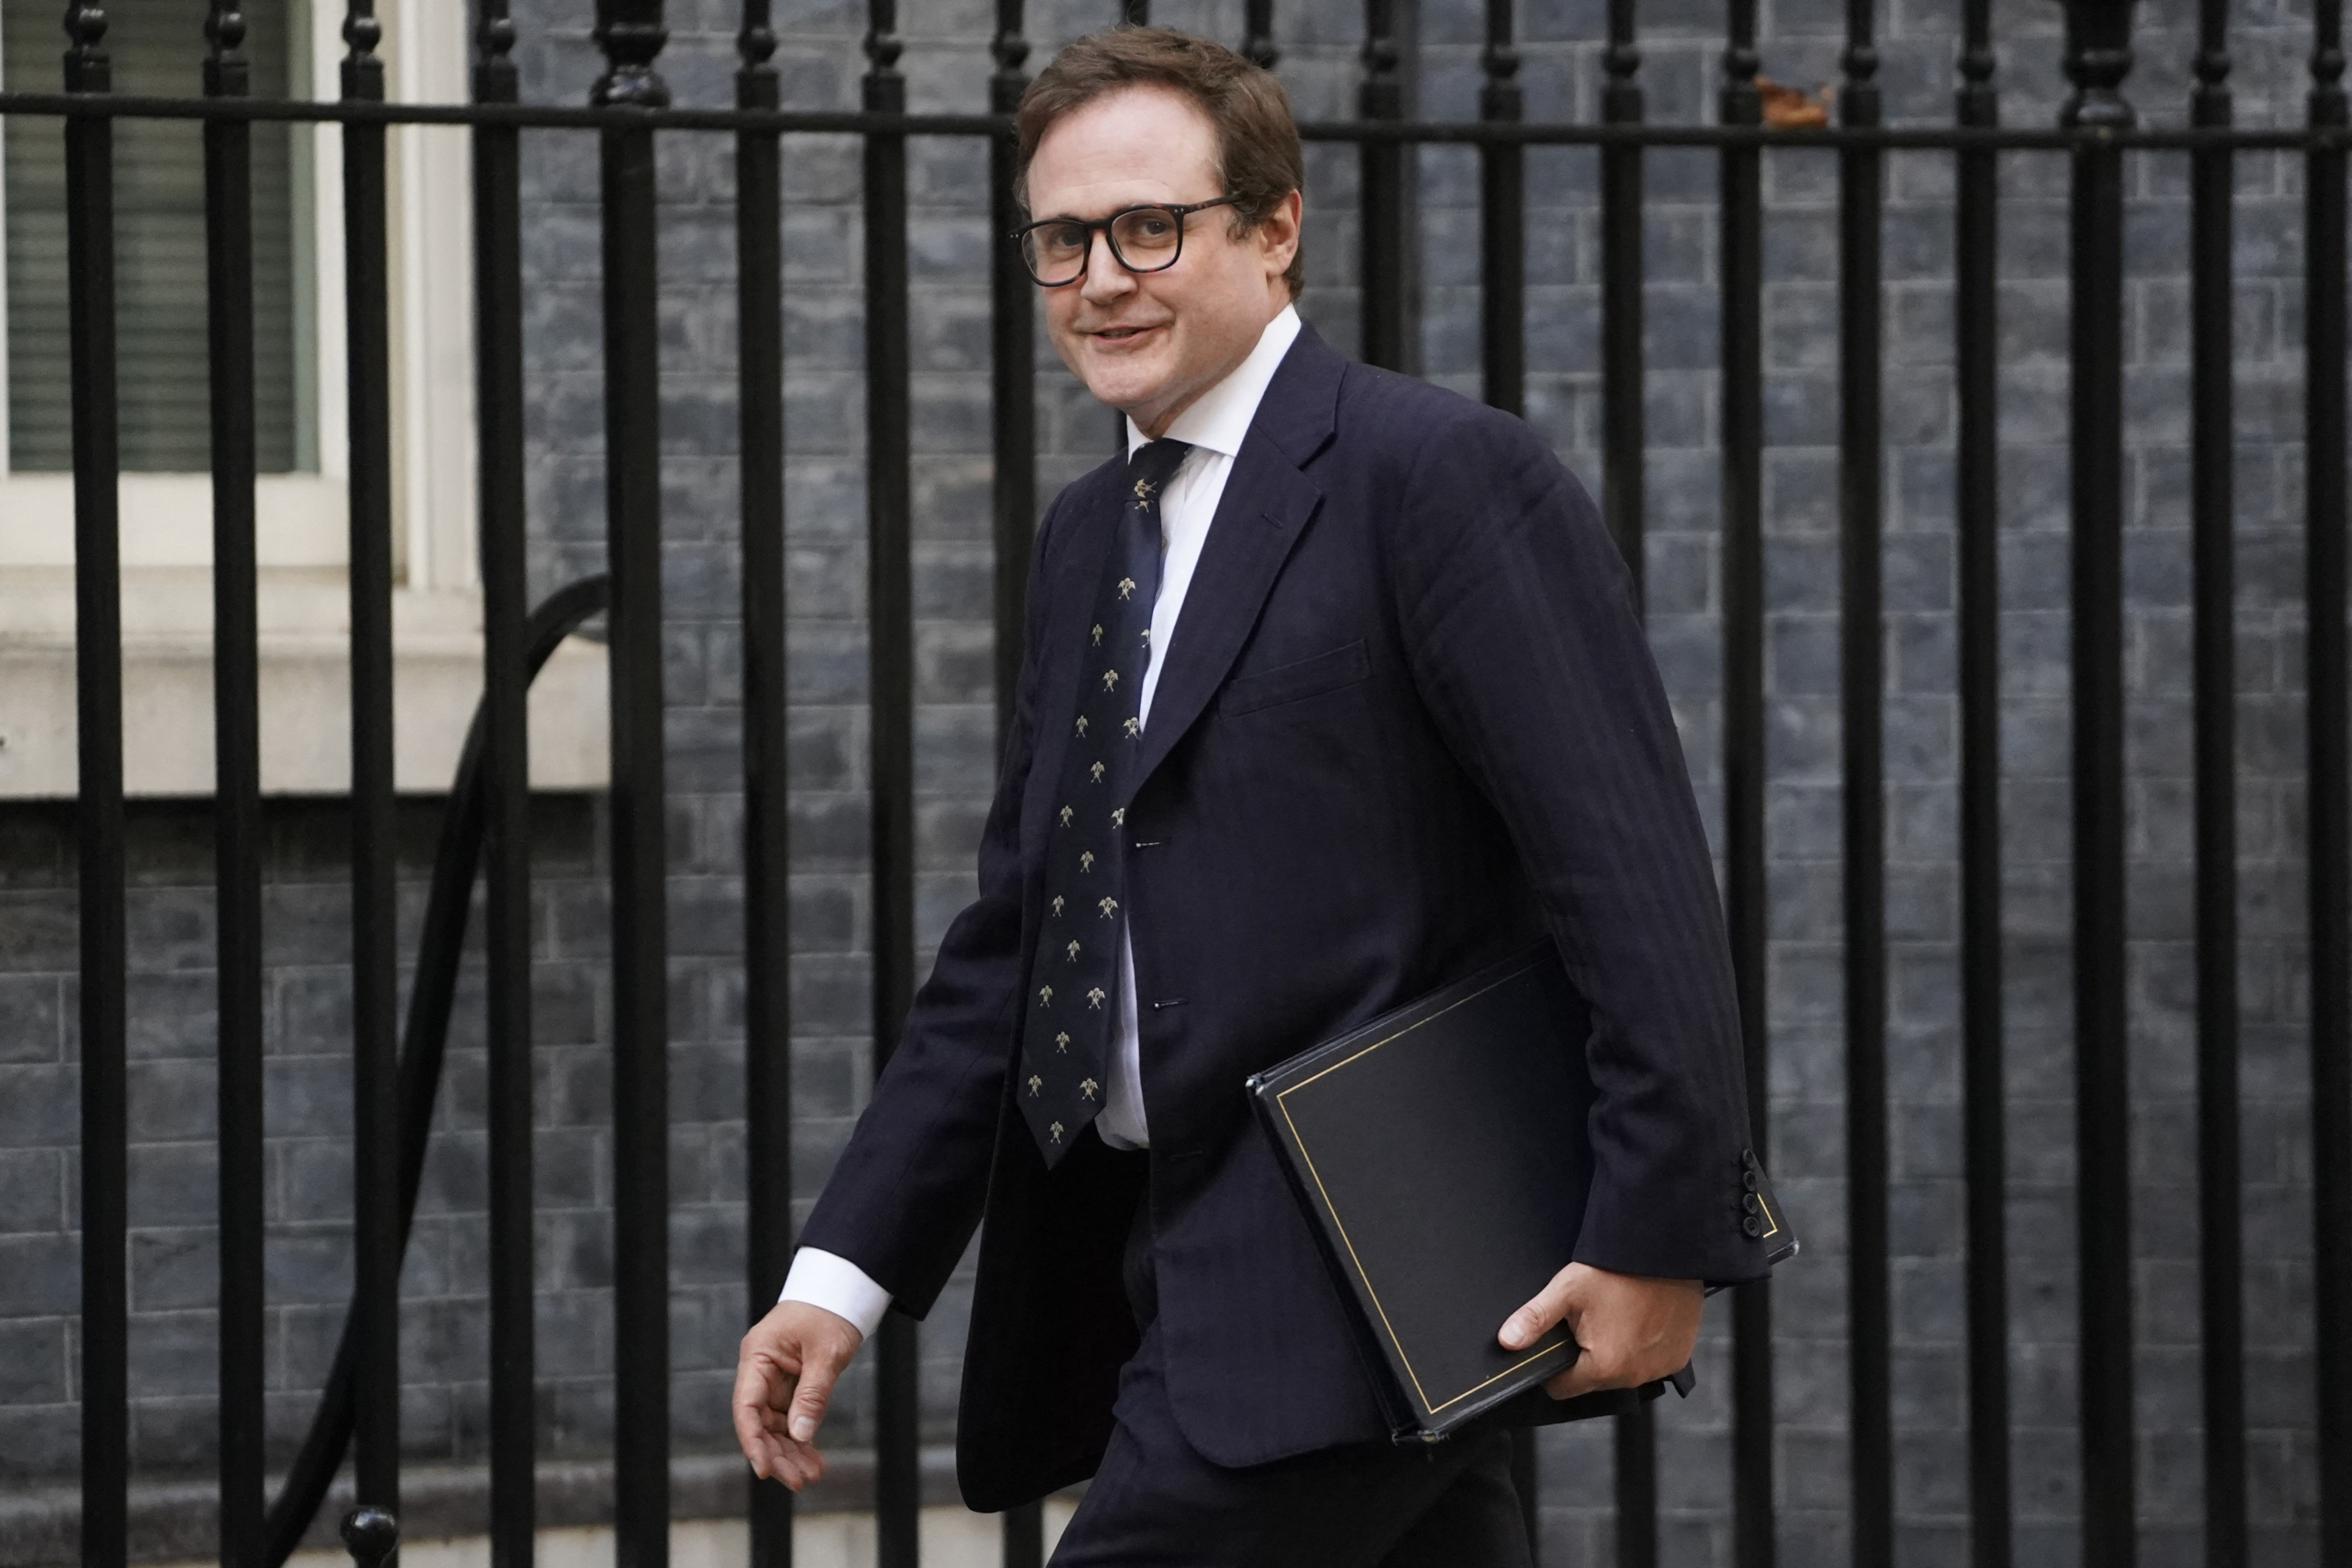 The alleged spy worked for a China focused think tank founded by the Conservative MP and now minister Tom Tugendhat. Photo: AFP